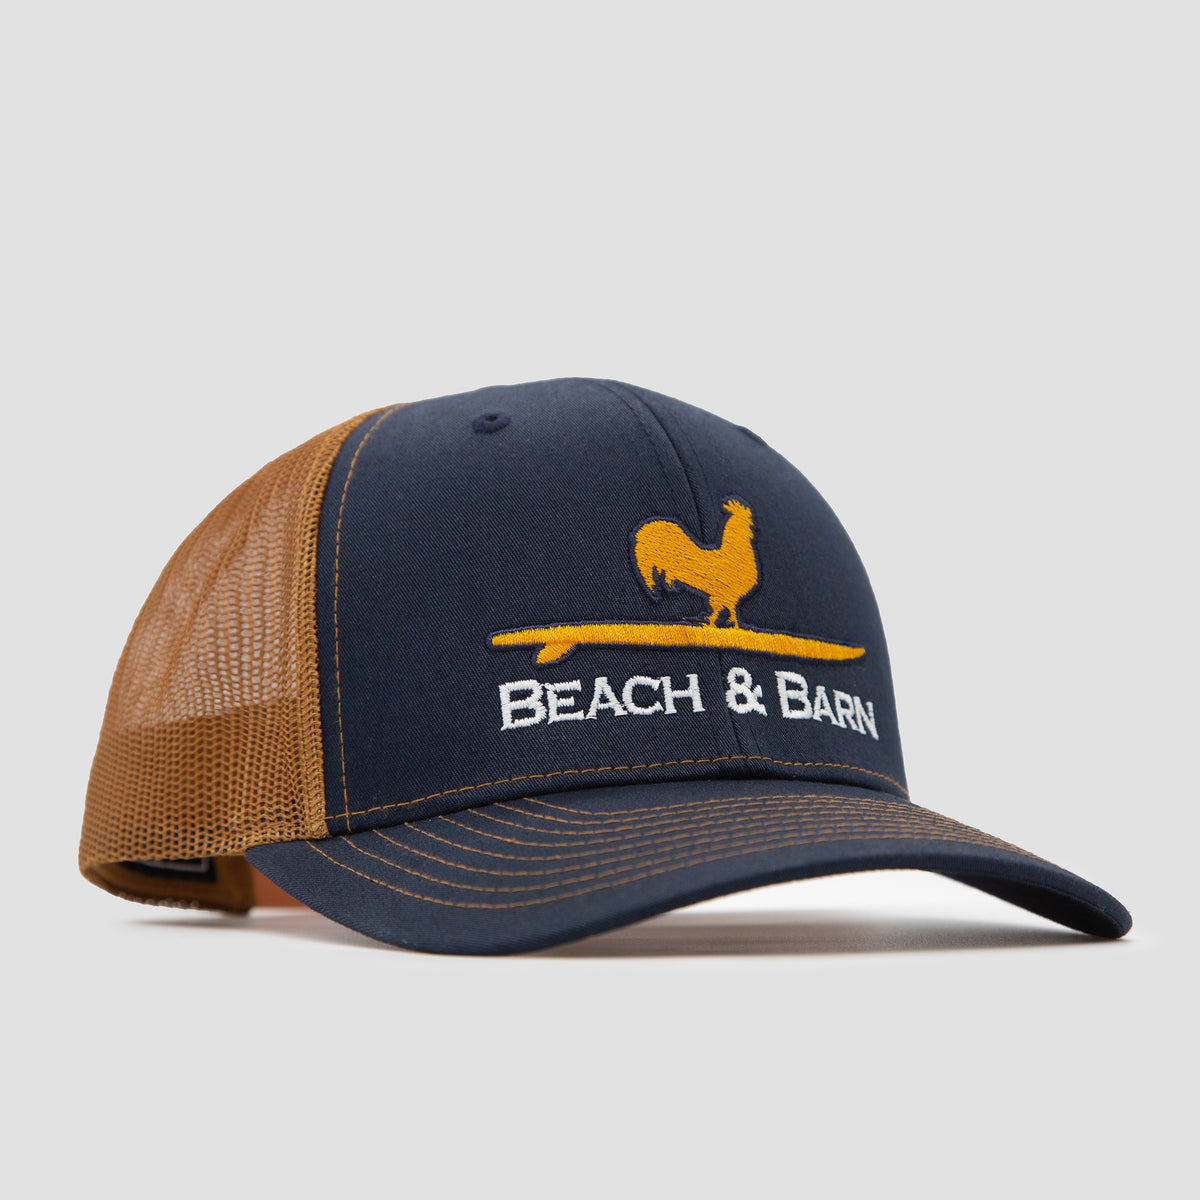 Sale - Surfing Rooster Snapback Hat